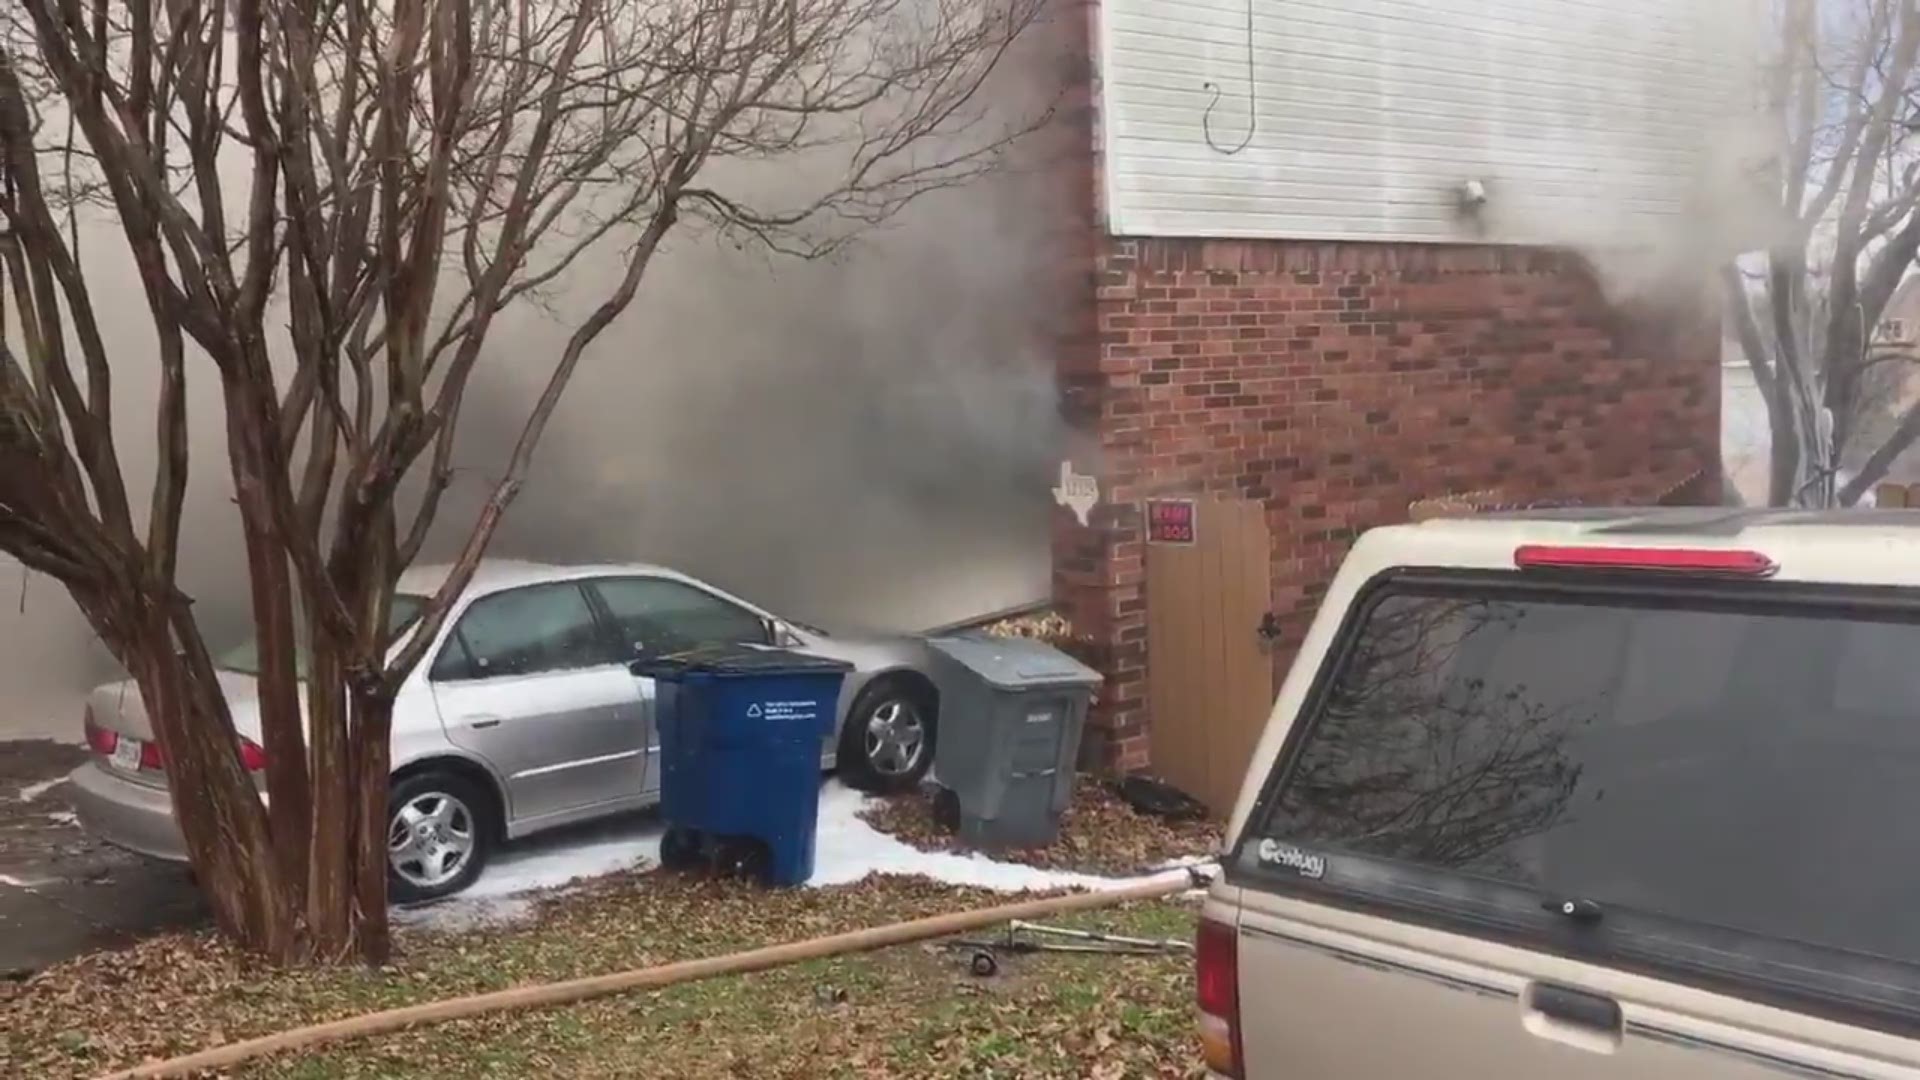 Austin Fire Department shared video of a house fire they are battling Friday morning amid high winds.